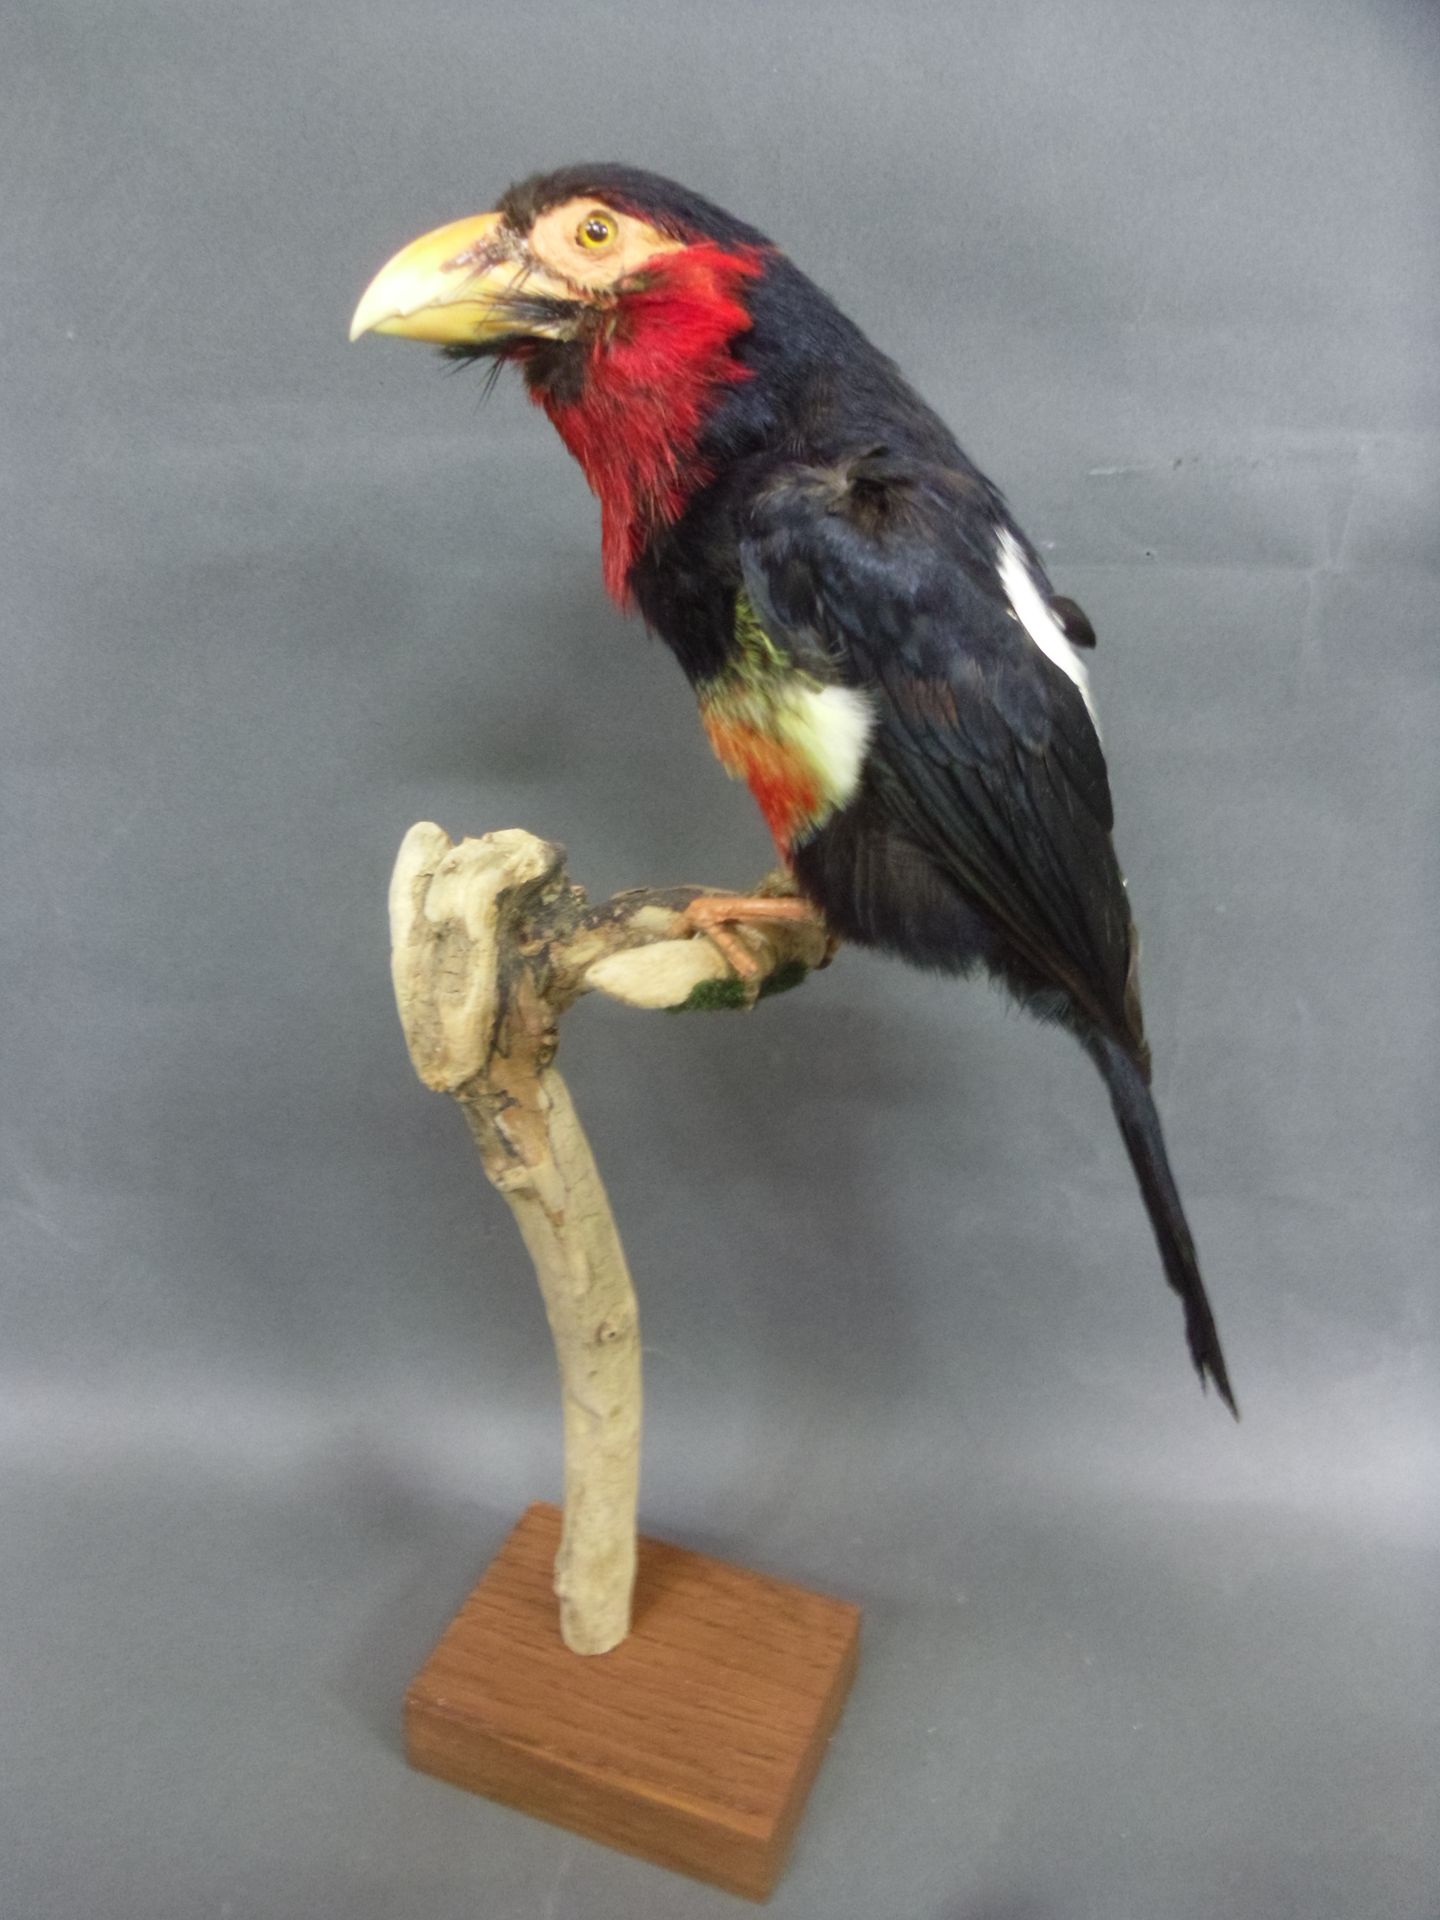 Null Red-breasted Barbet (Lybius dubius) (NR) : specimen presented on branch and&hellip;